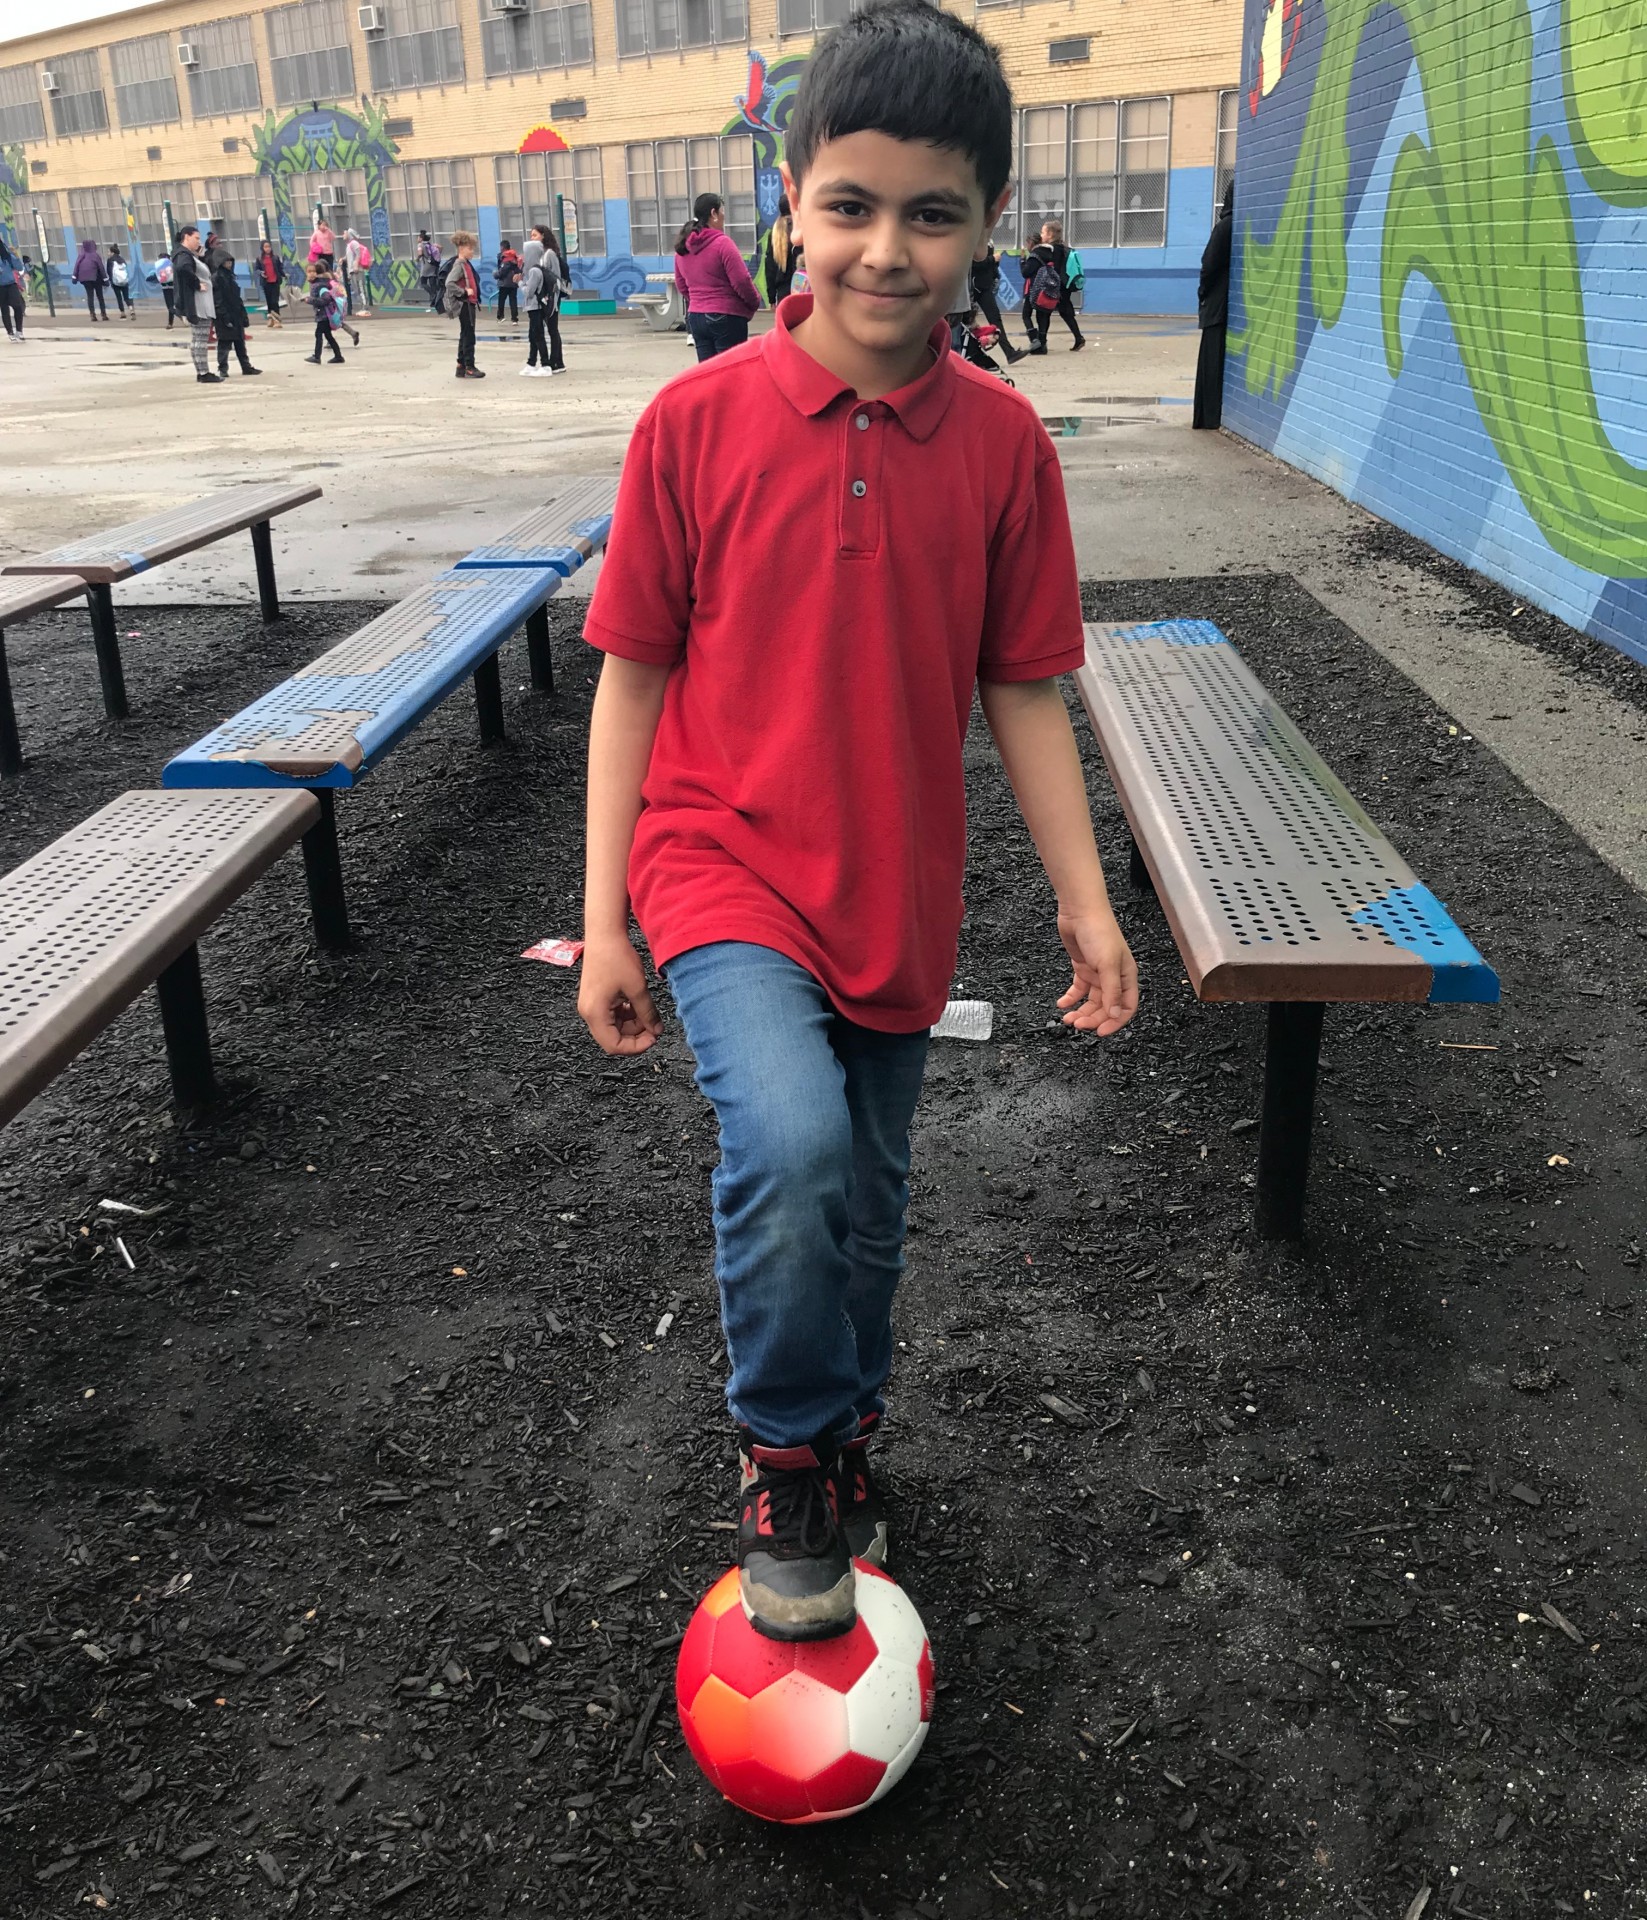 Seraj, a refugee from Syria, playing with the soccer balls I provided to HIAS.